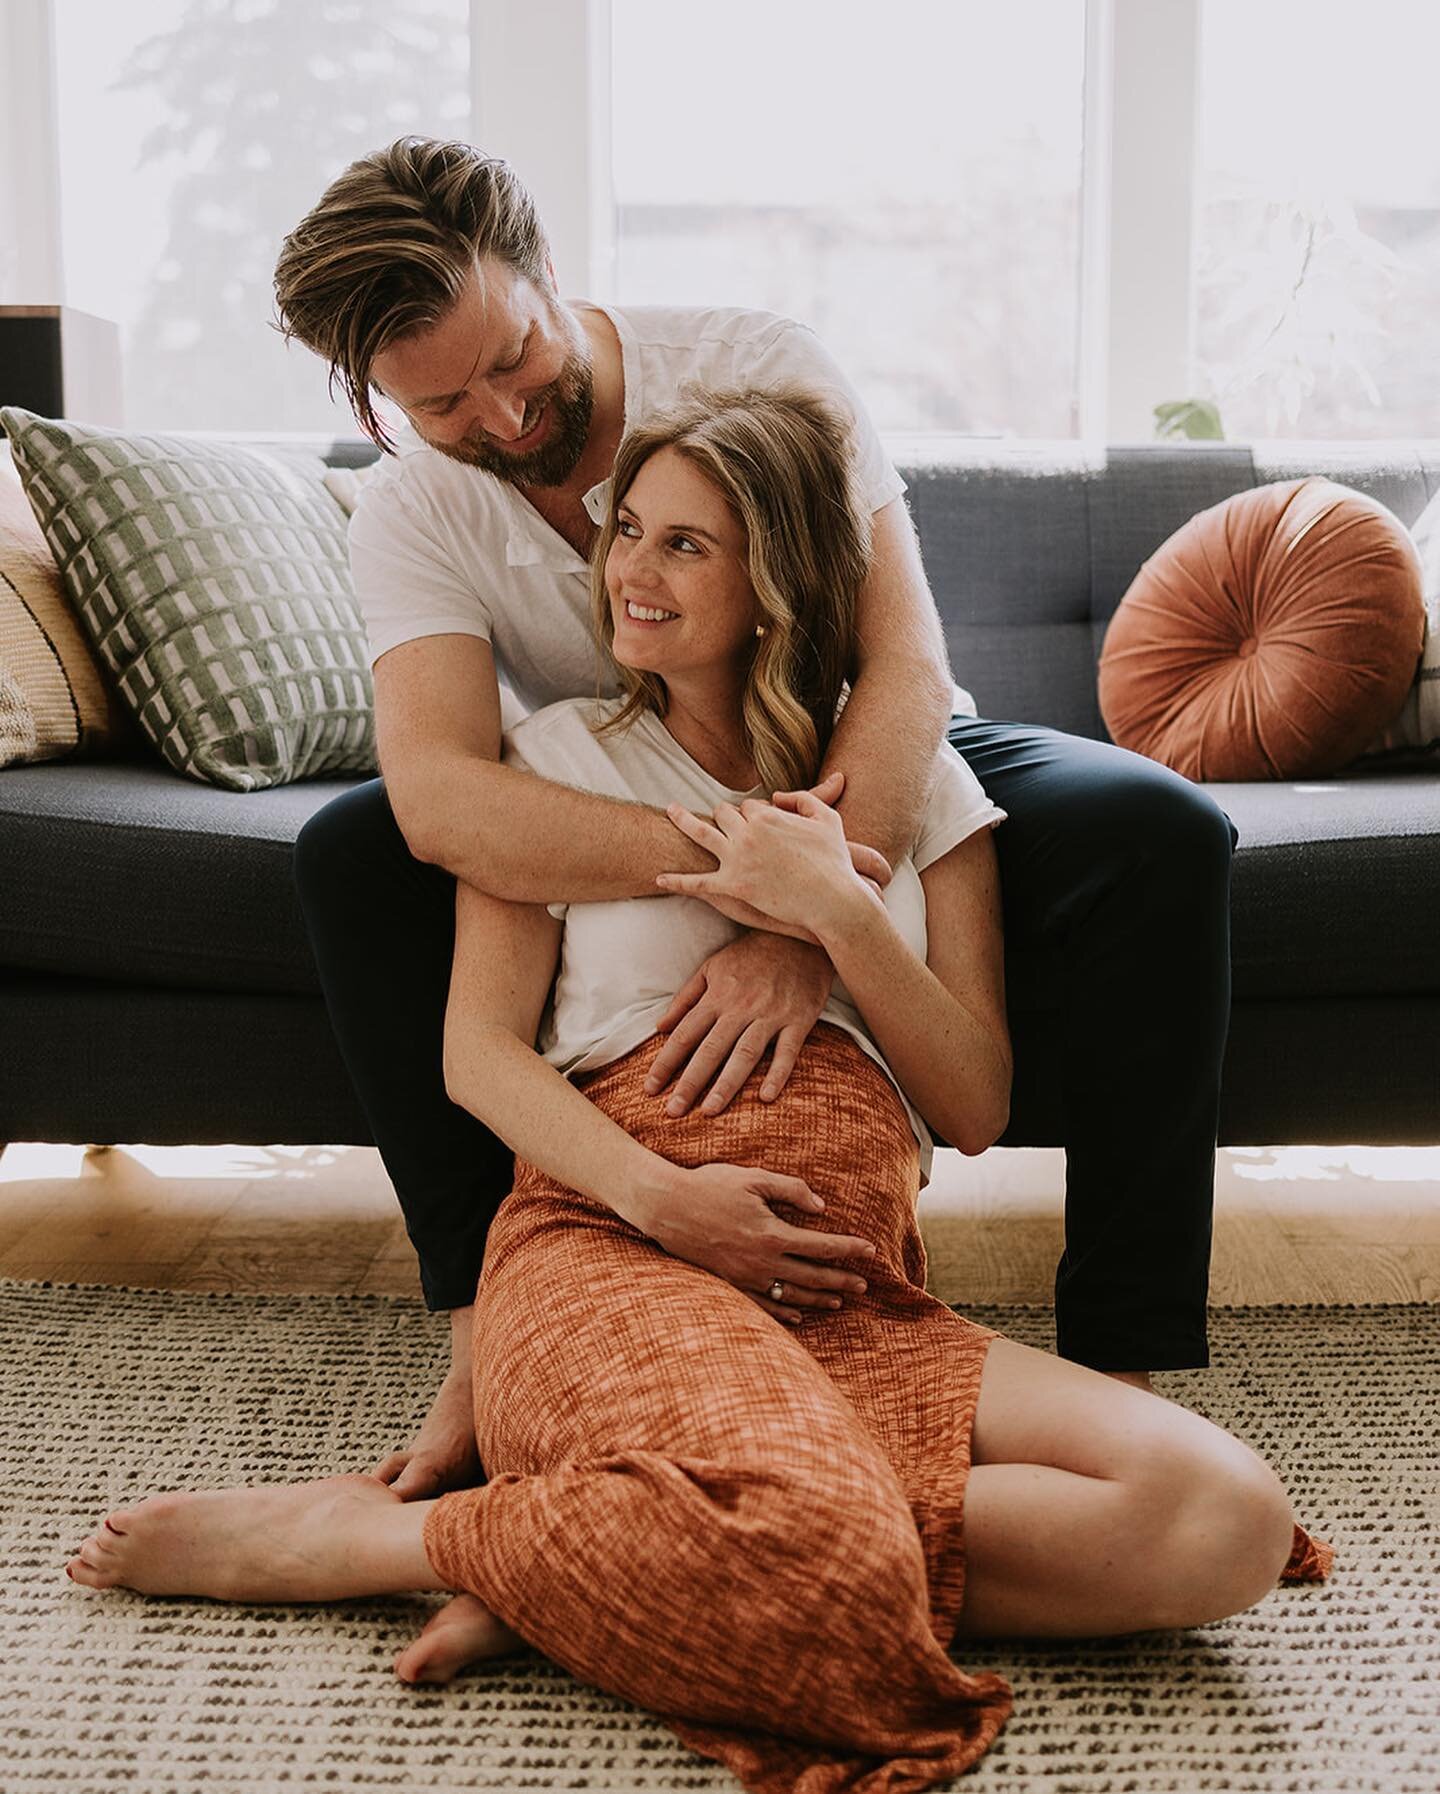 Photographed this beautiful couple a few weeks ago with my new assistant, Giuliana. (She slept on the job but was only there for moral support anyways, lol.) 

SO excited for this lovely couple to welcome their 1st child. 🥰 These two had such a calm